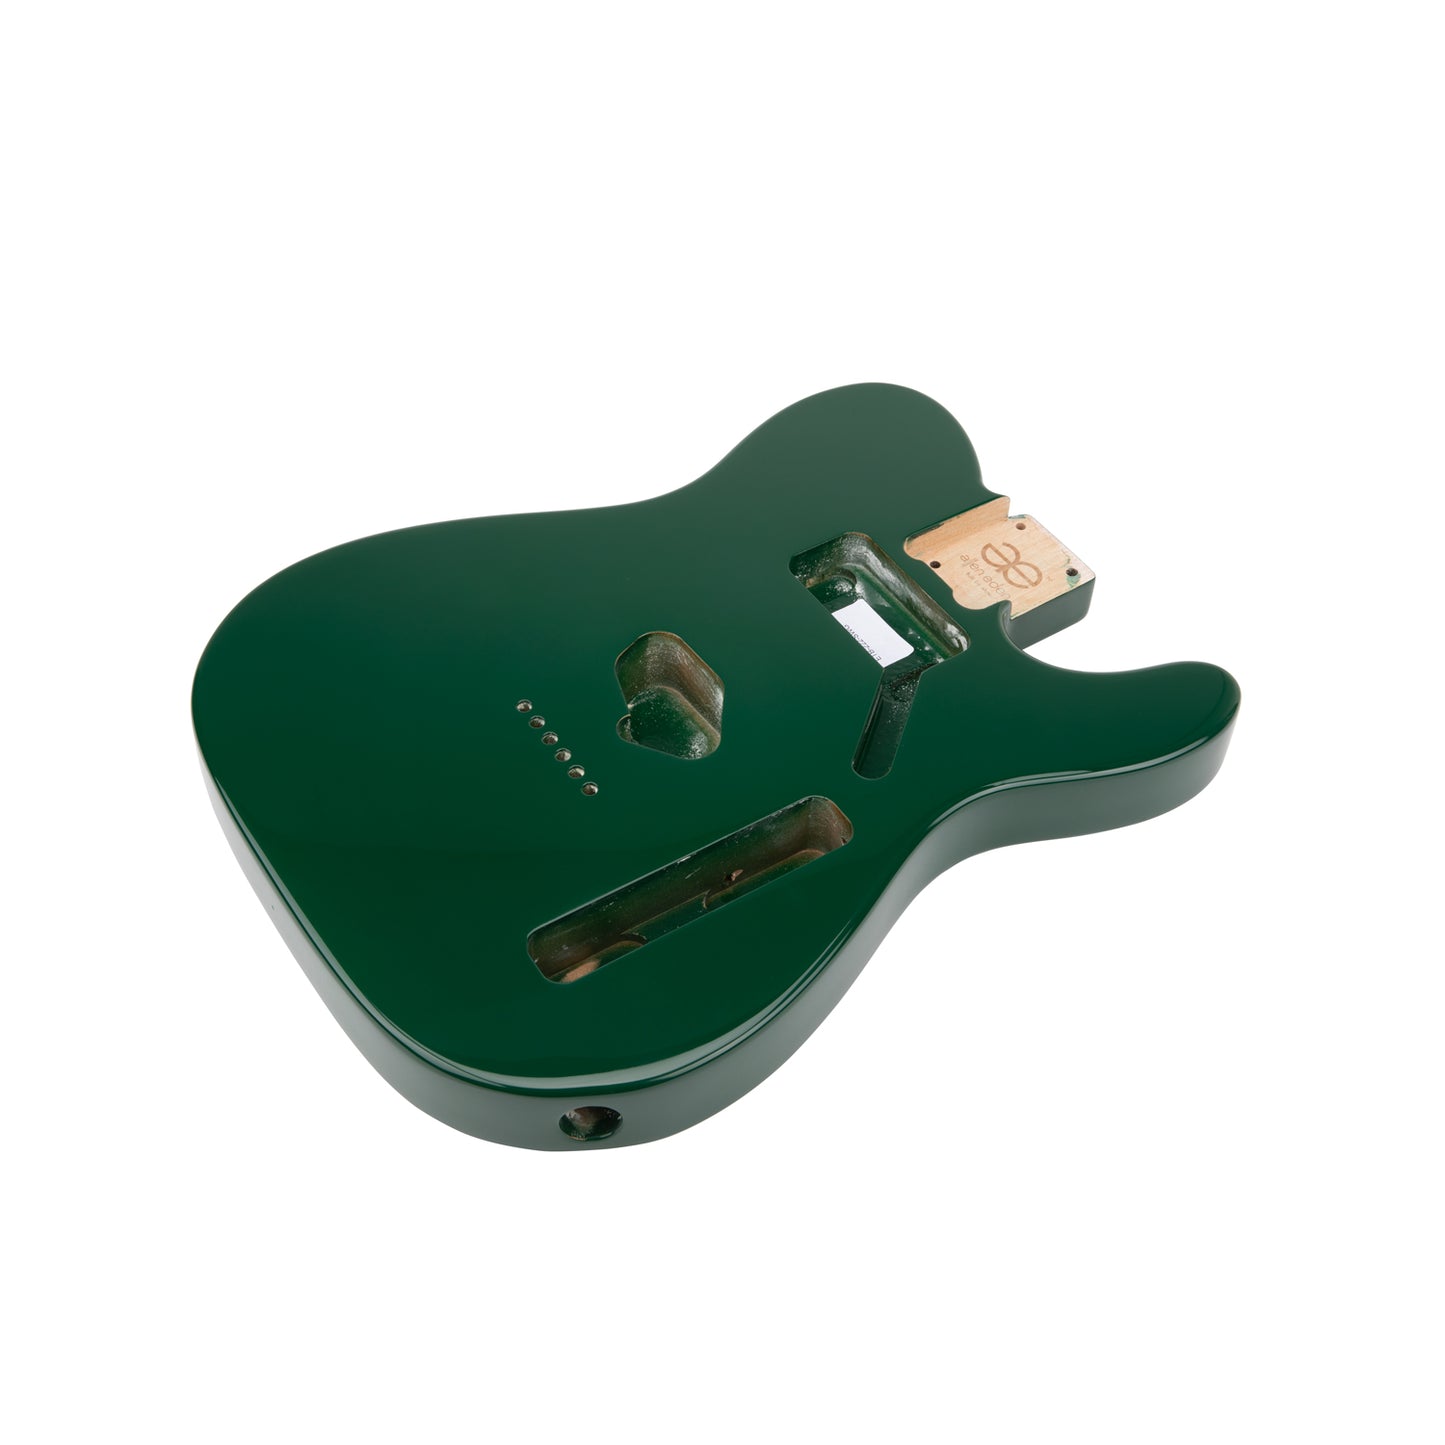 AE Guitars® T-Style Alder Replacement Guitar Body British Race Green